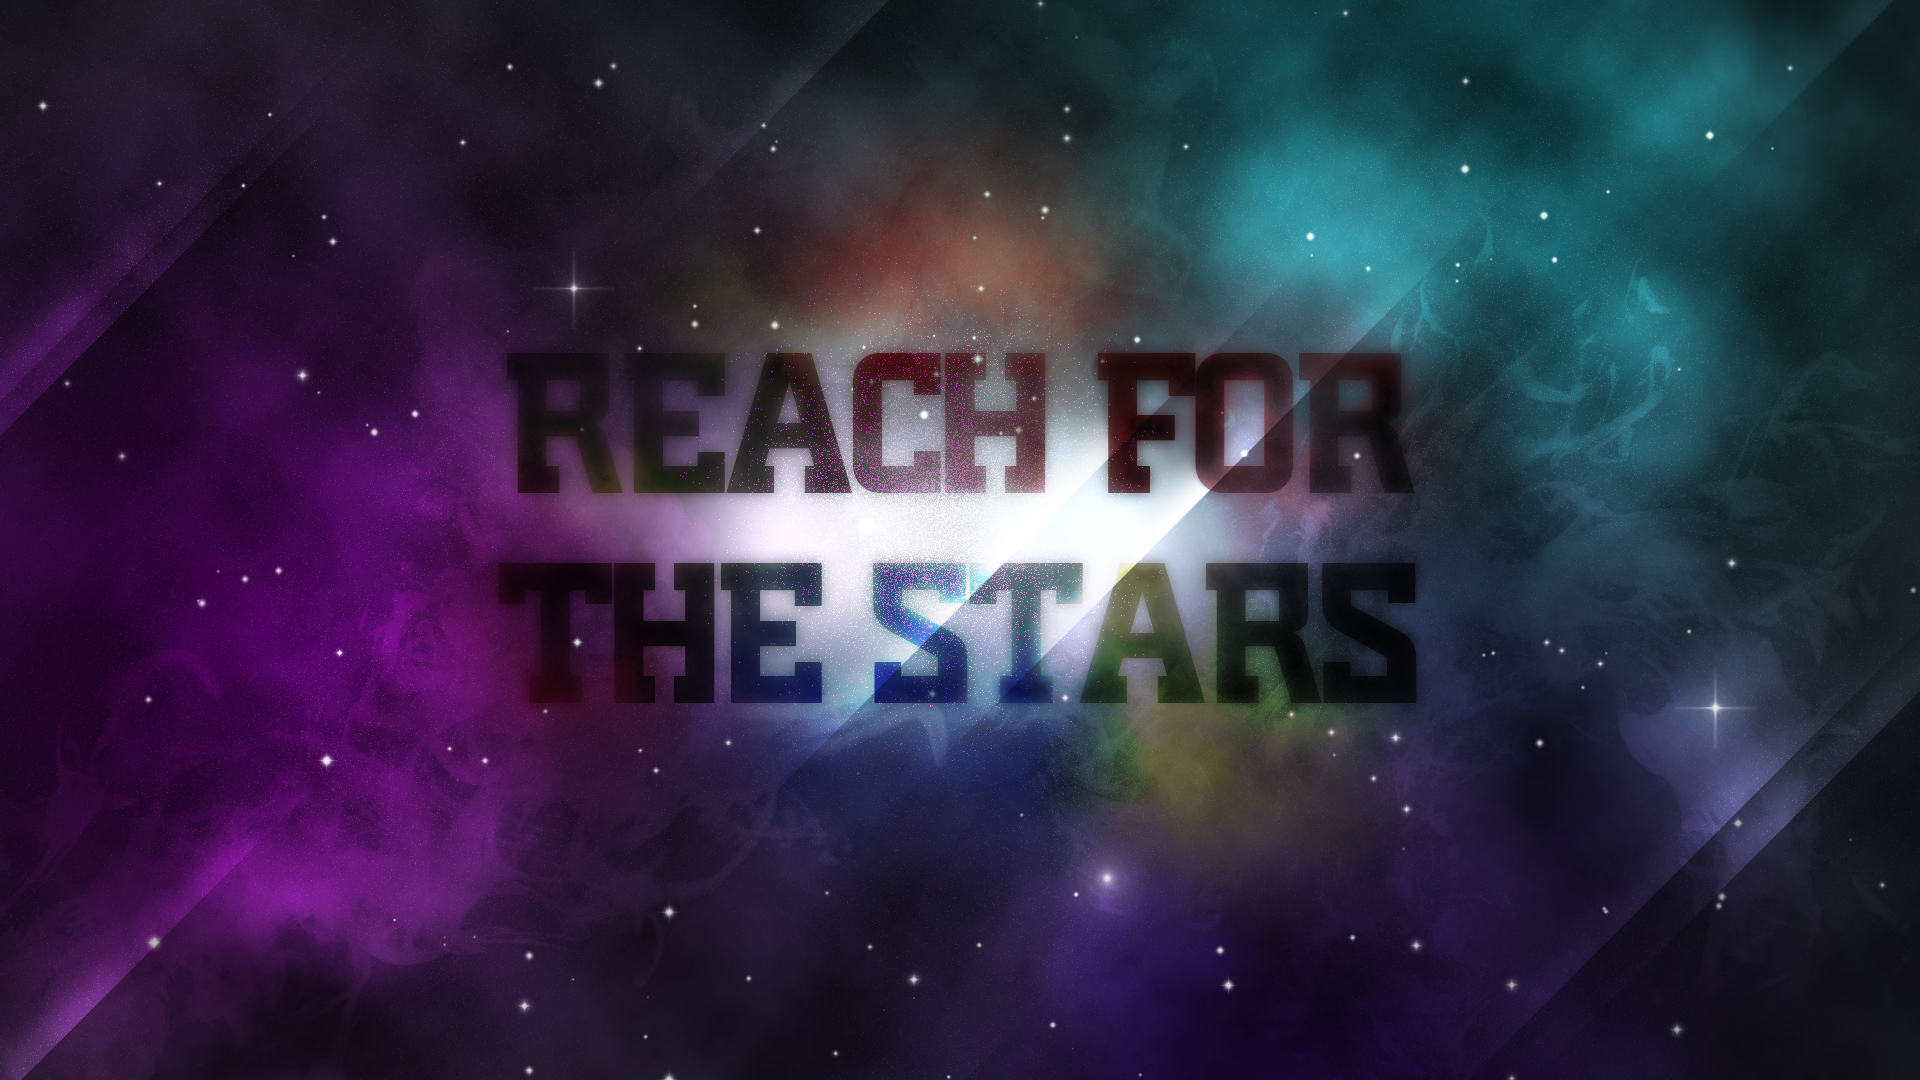 Reach For The Stars Quotes Quotesgram